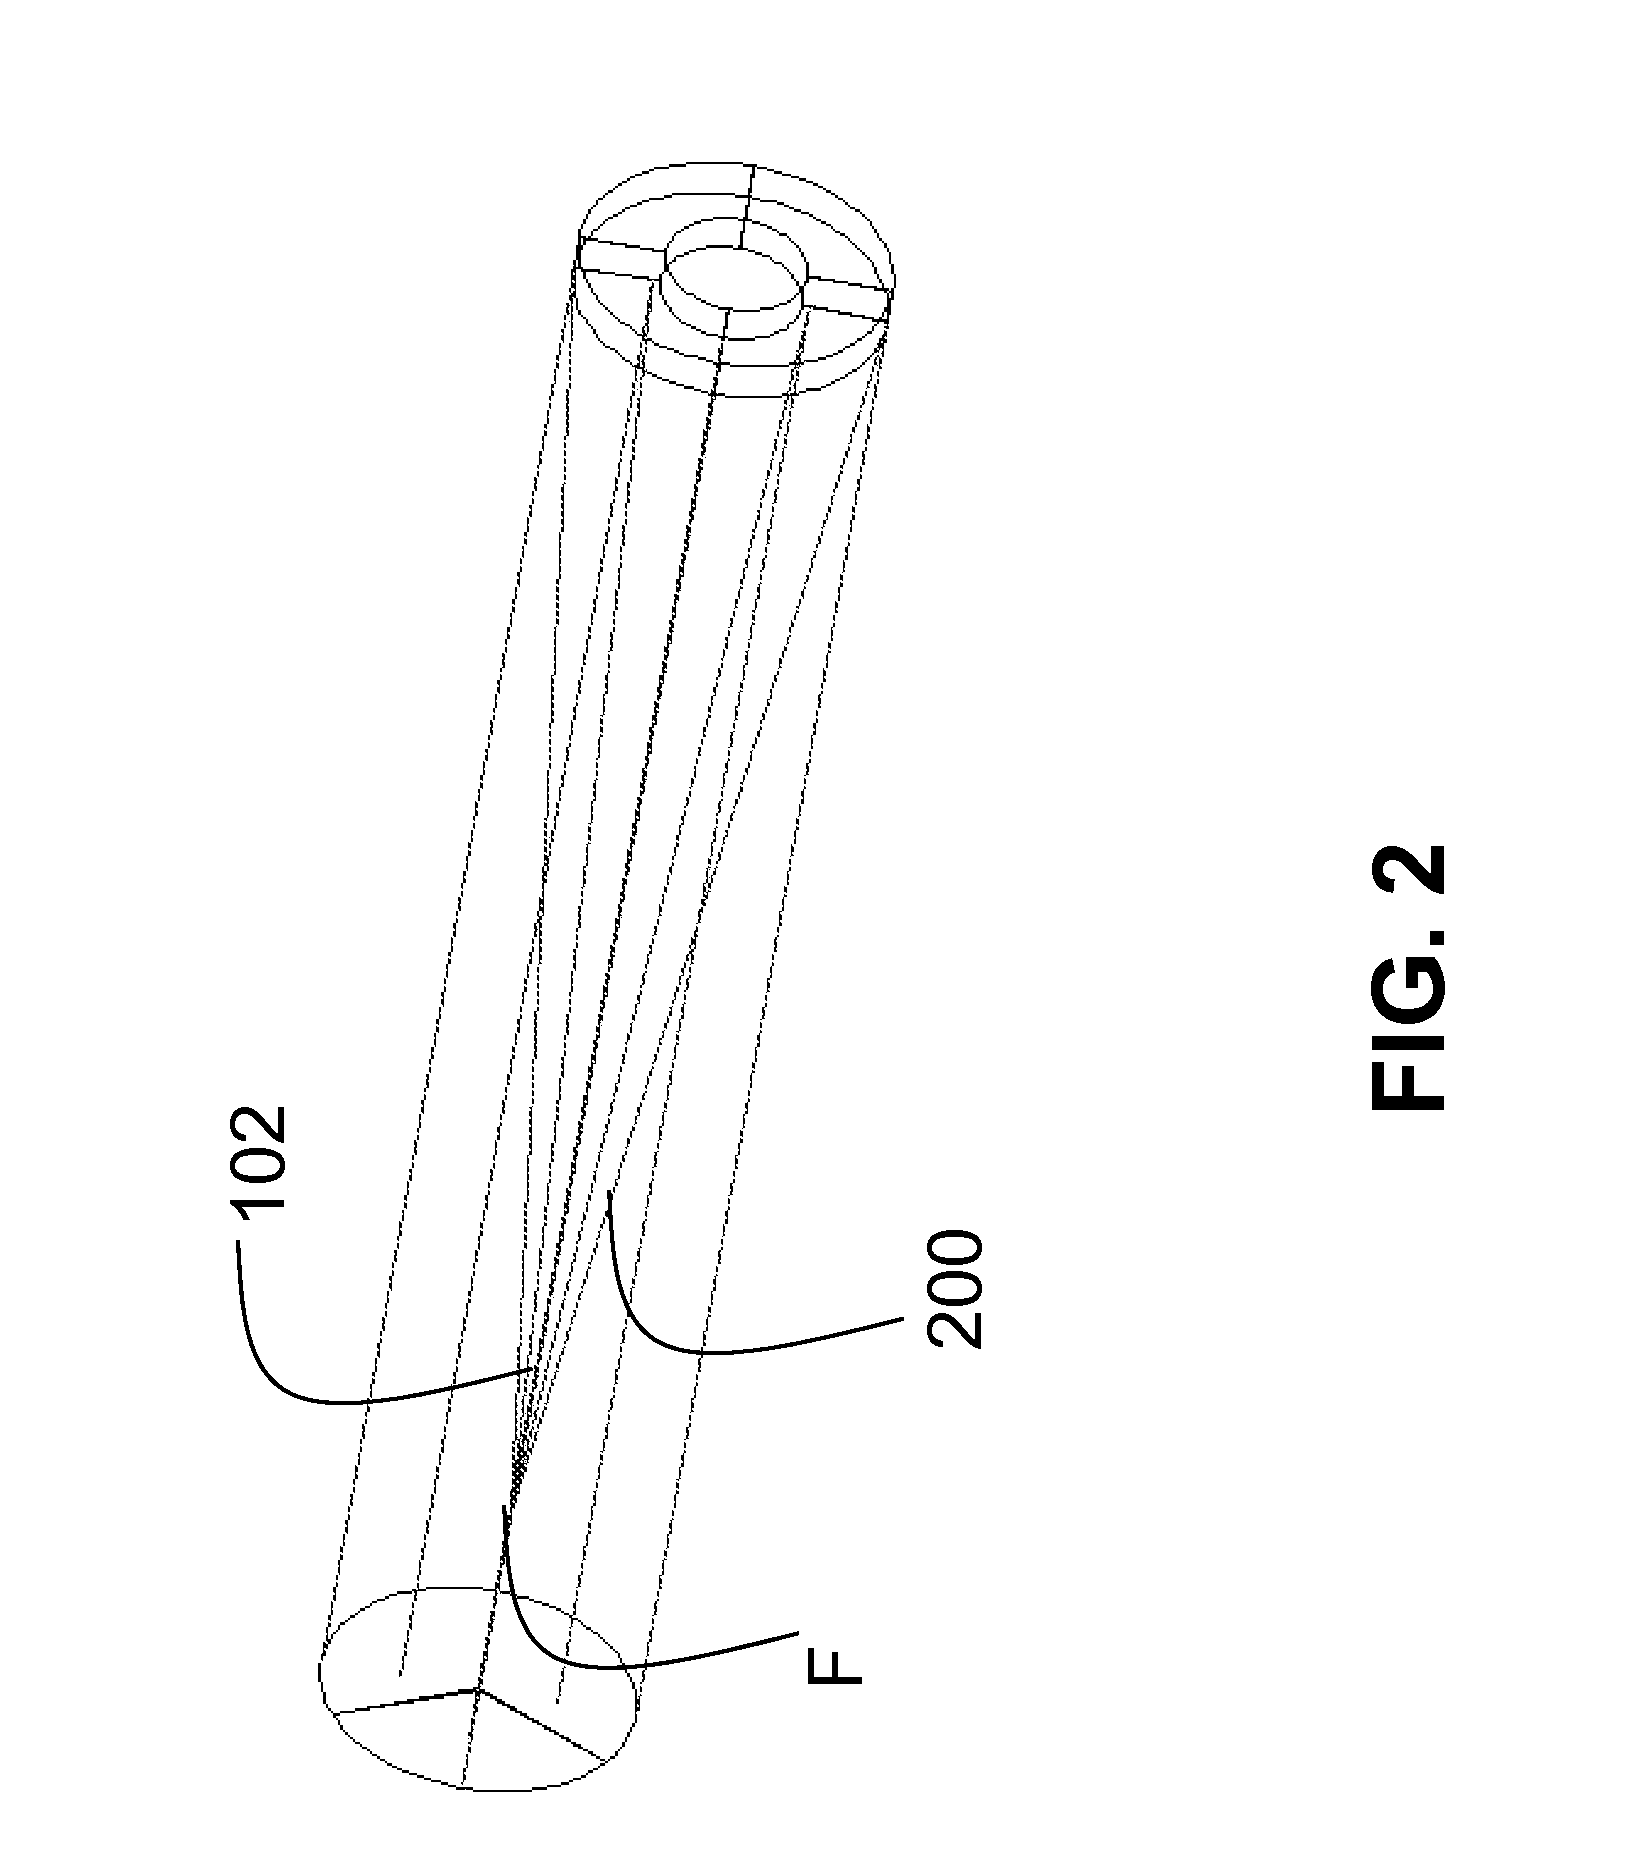 Methods to fabricate and improve stand-alone and integrated filters